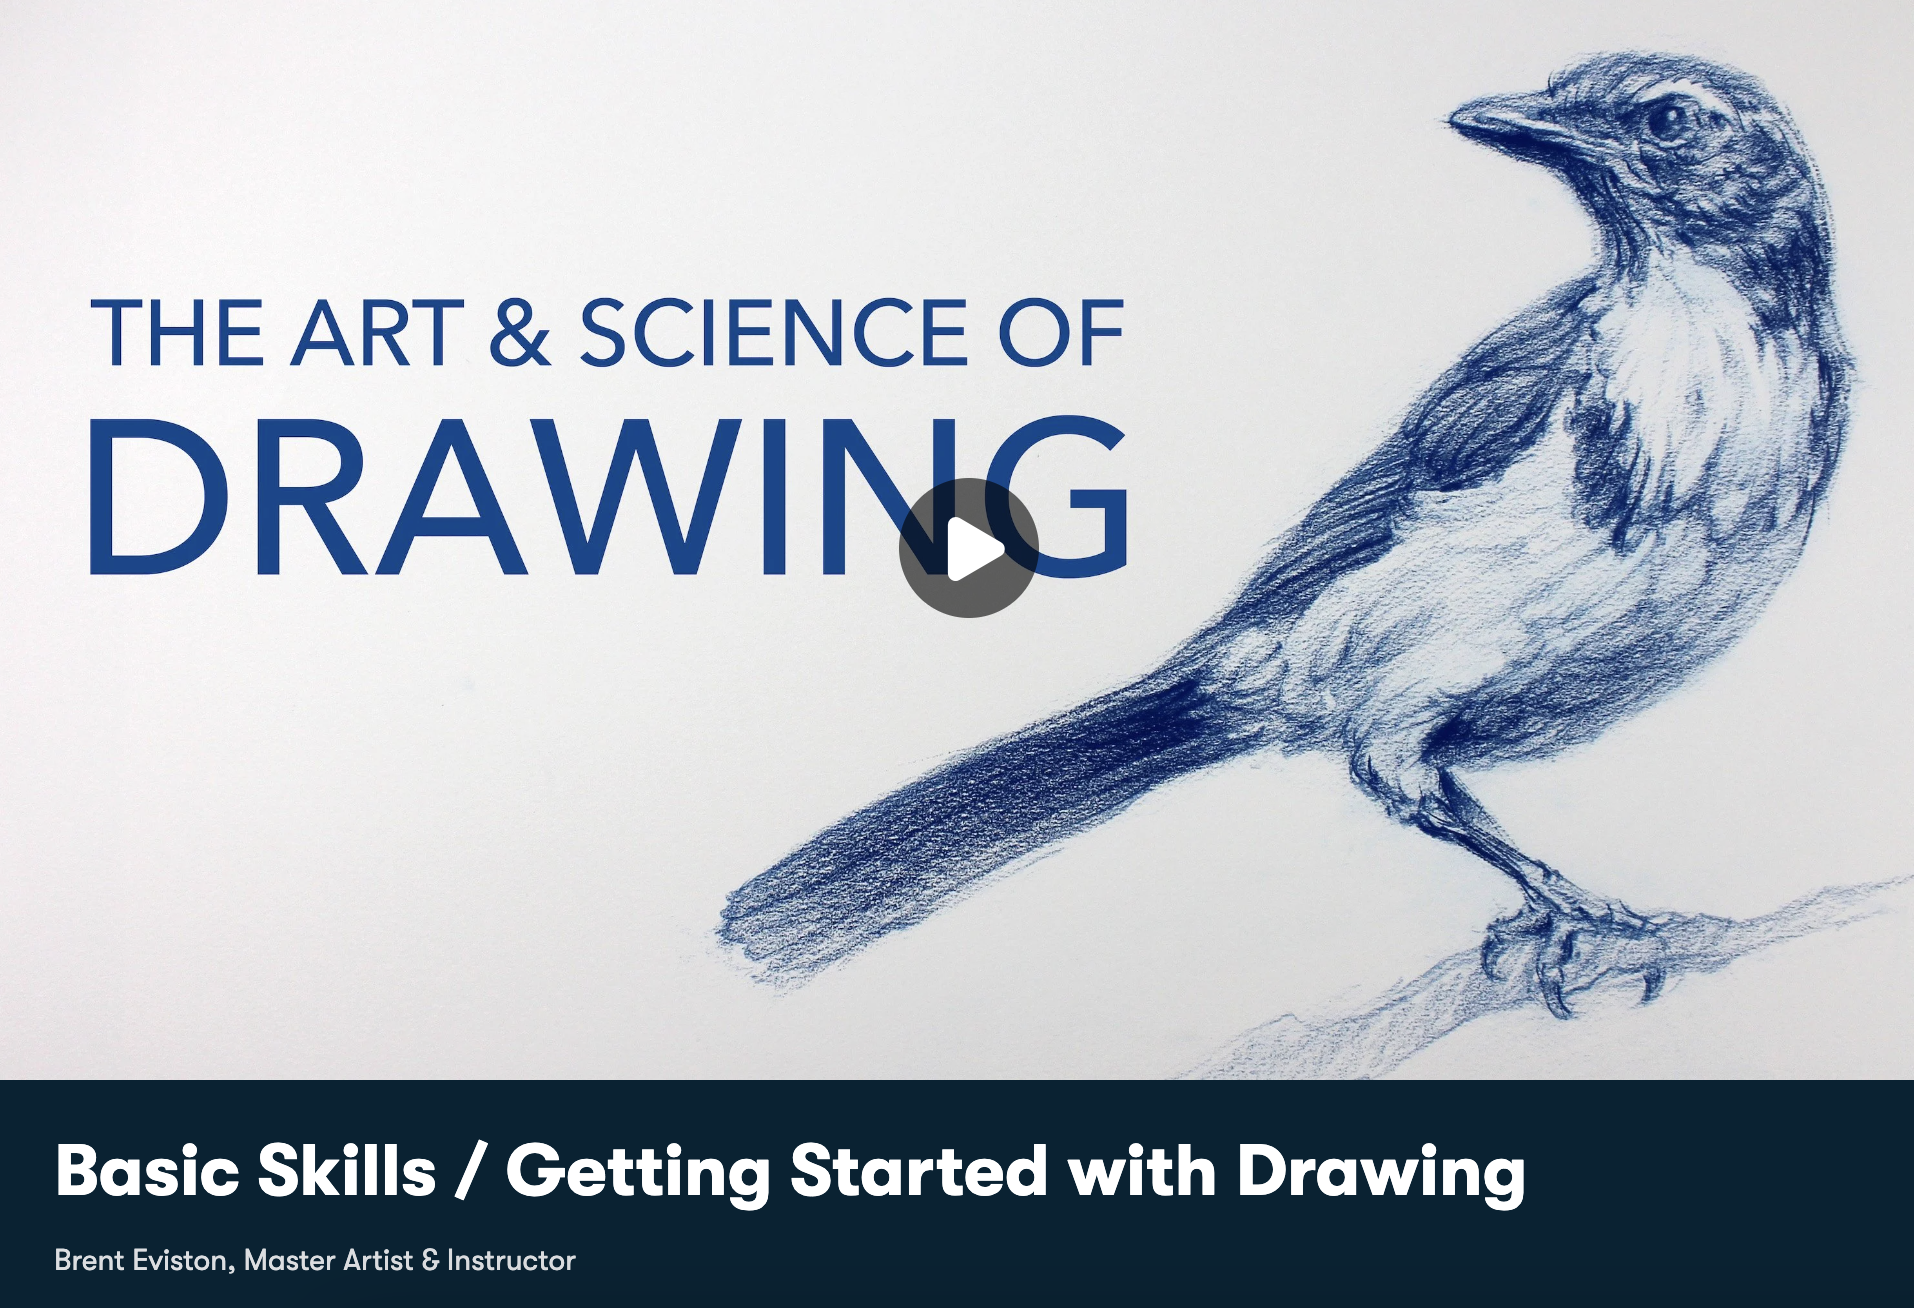 Getting Started With Drawing